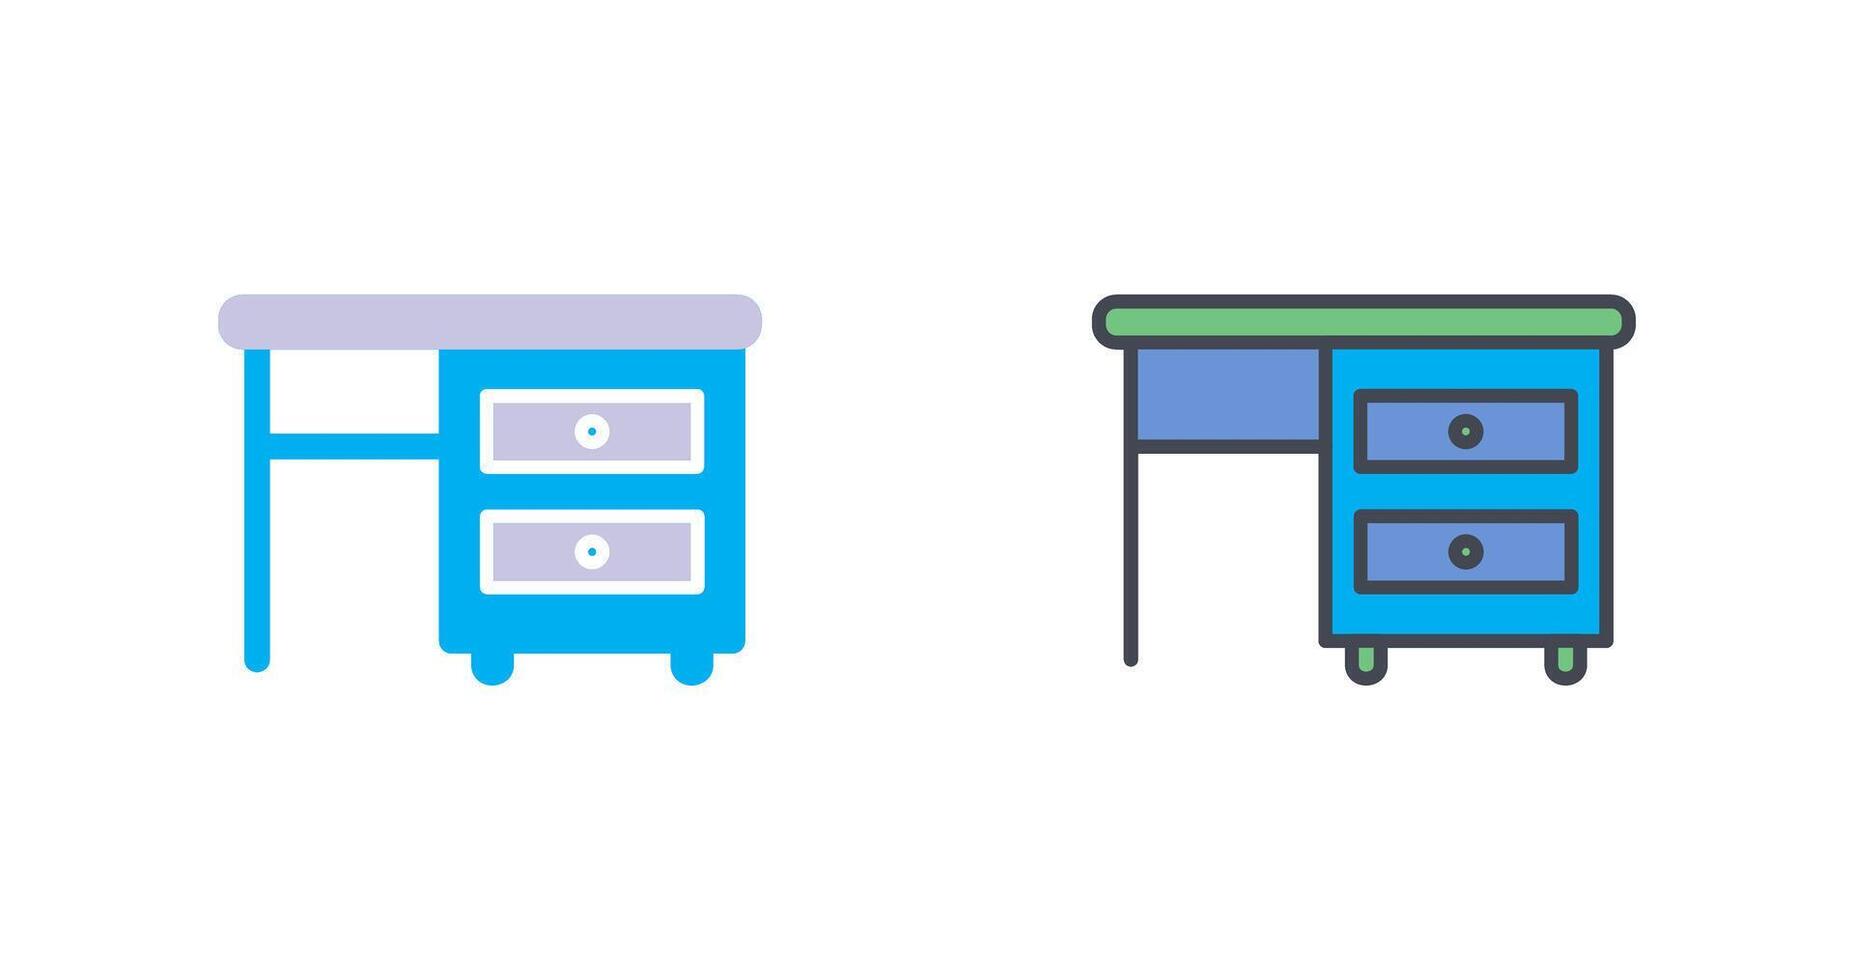 Table with Drawers I Icon Design vector